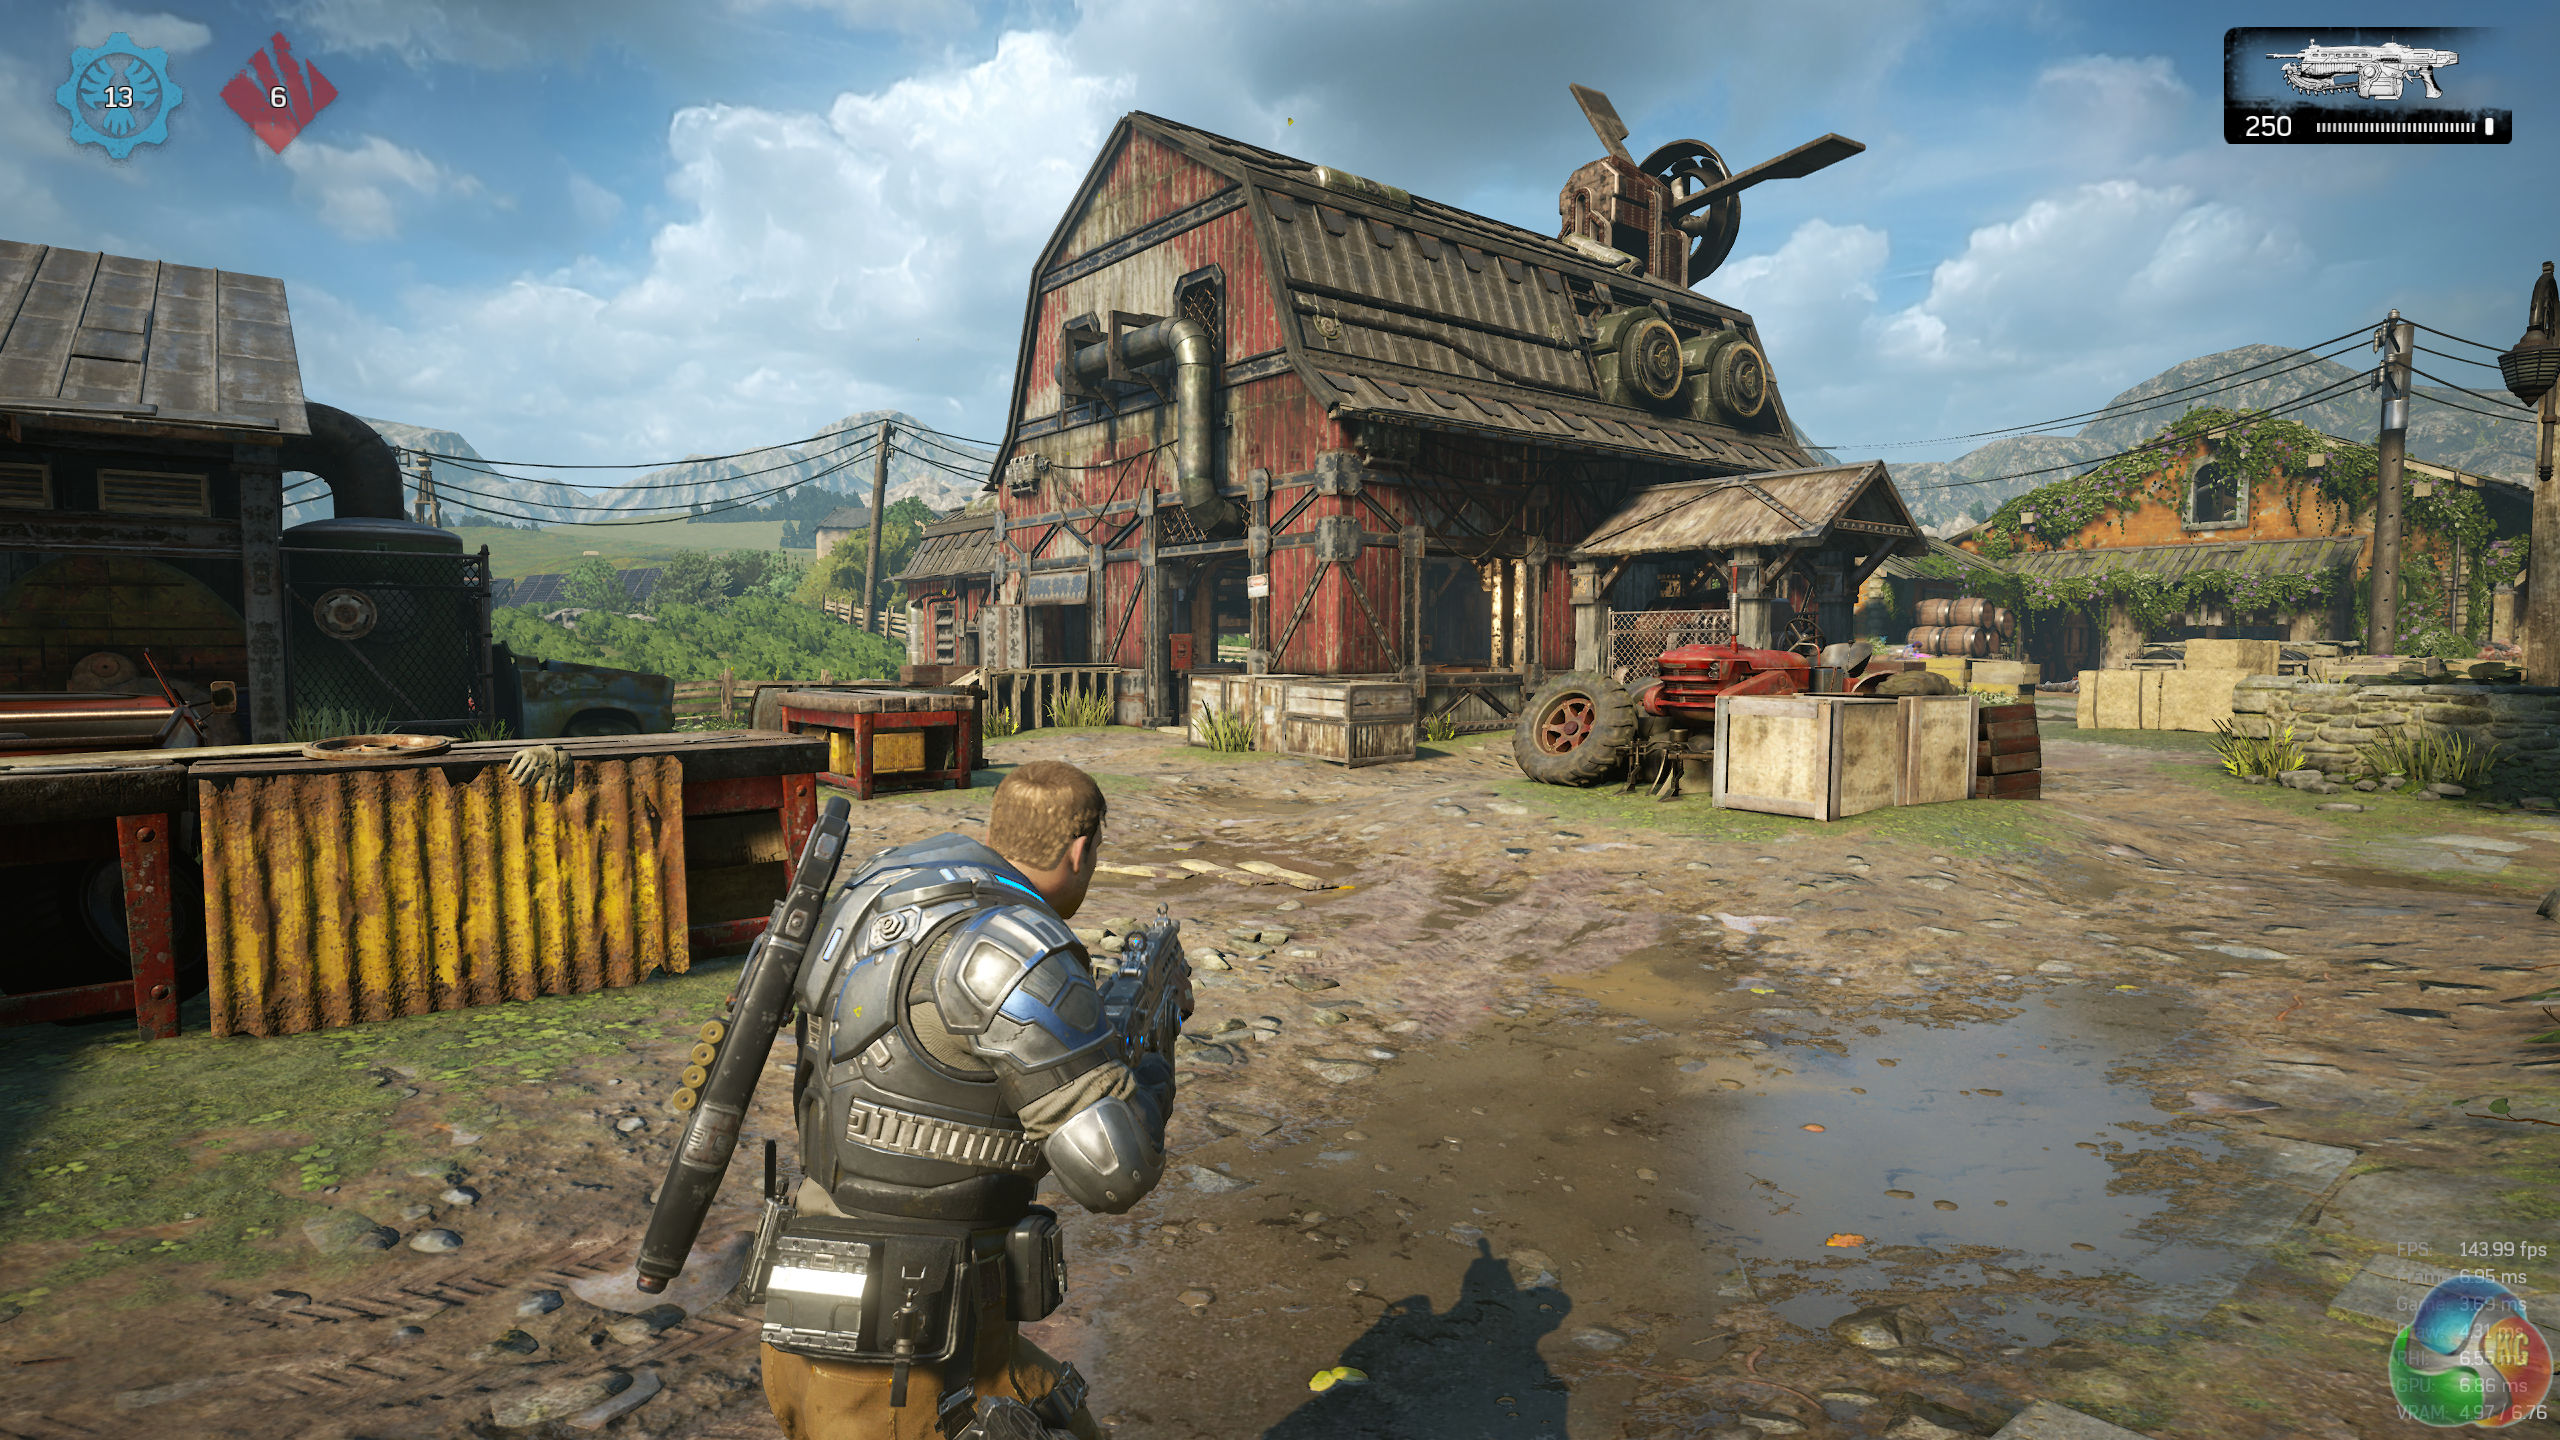 Gears of War 4 PC benchmark performance tested